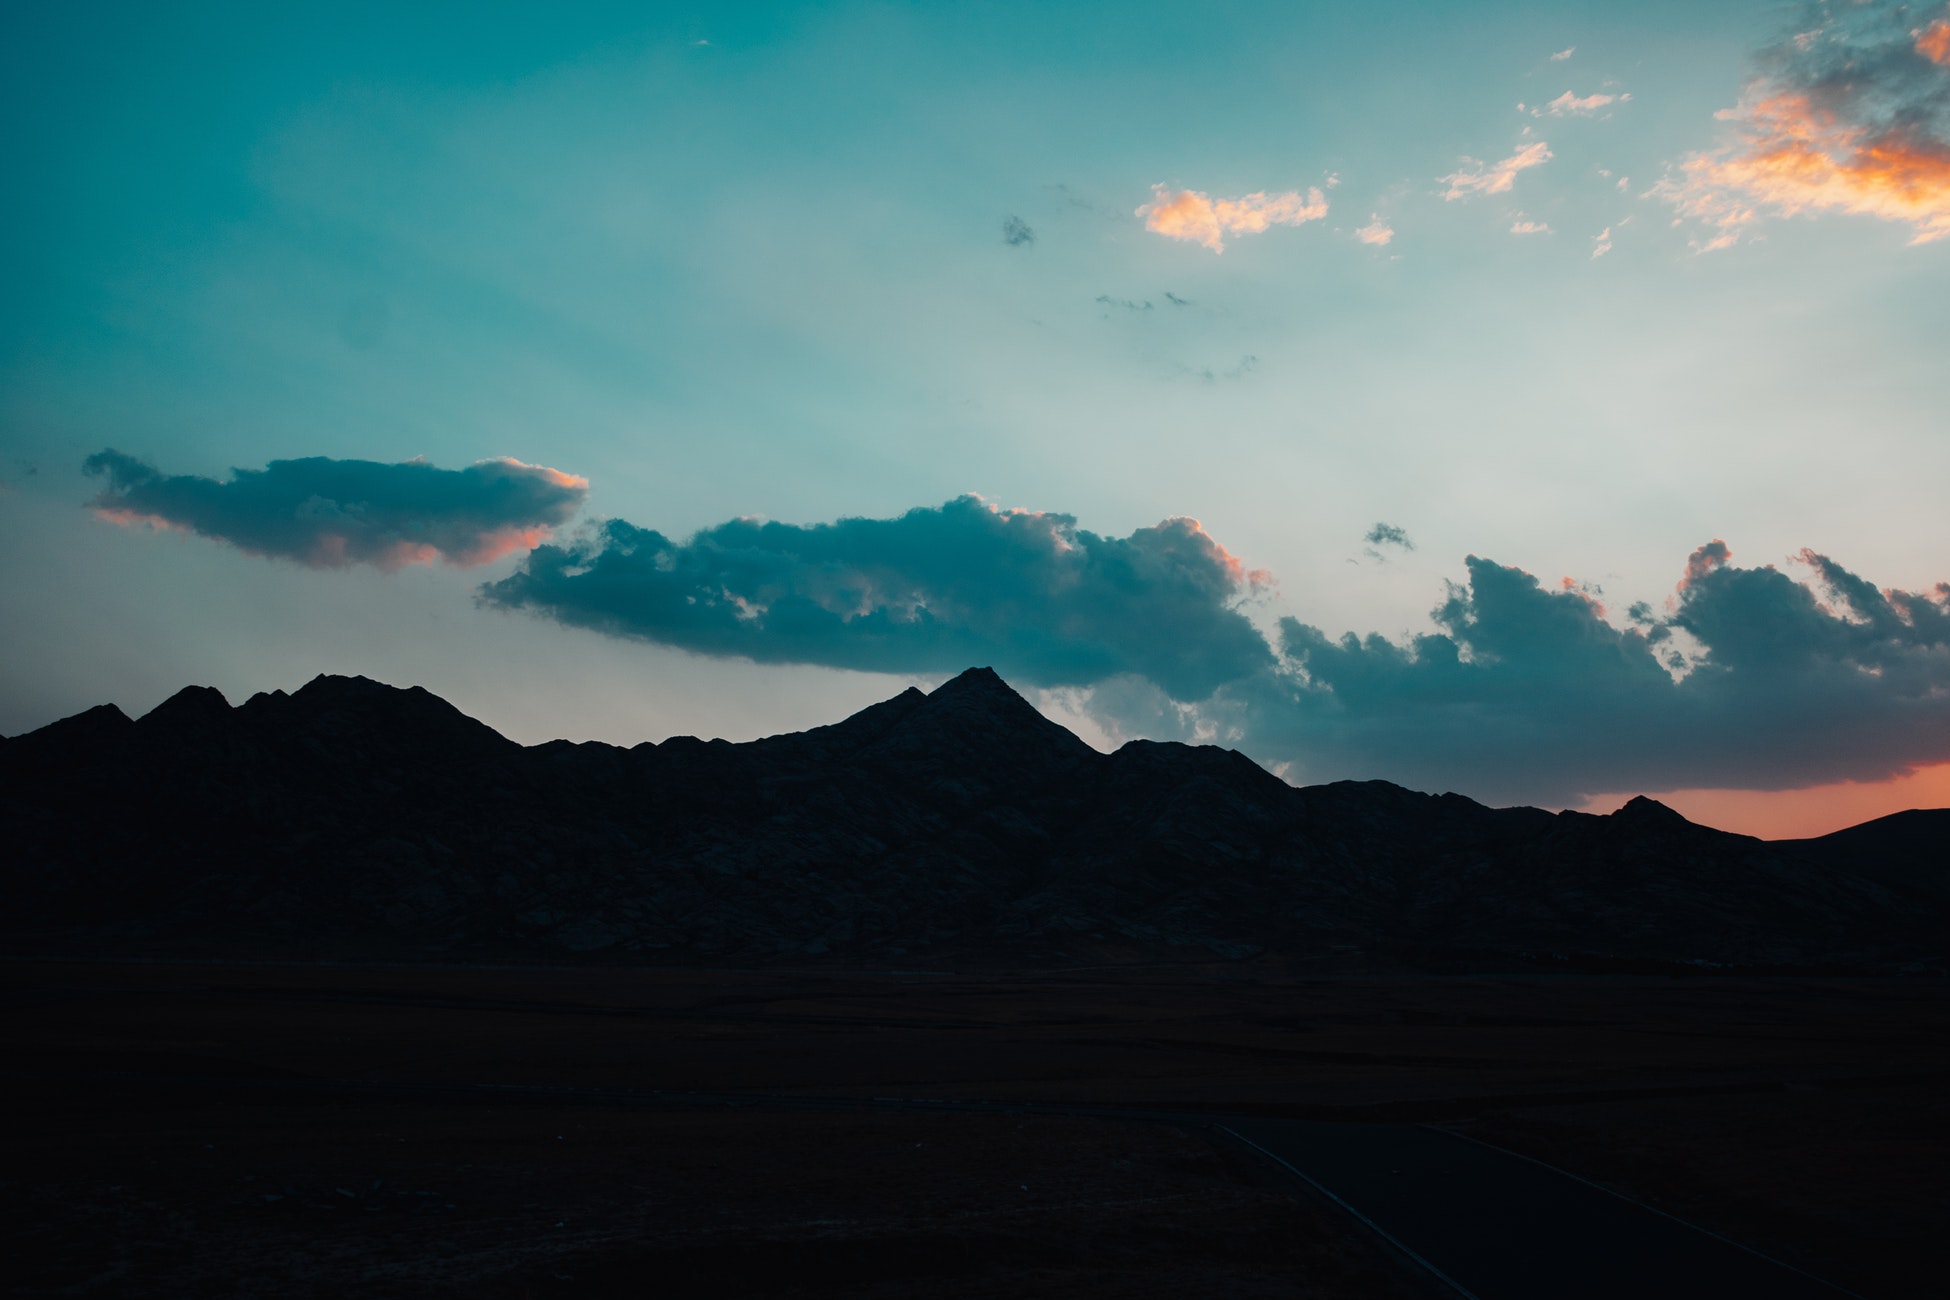 Mohammad Alizade, Landscape, Nature, Photography, Iran, Mountains, Sky, Clouds, Sunset Wallpaper